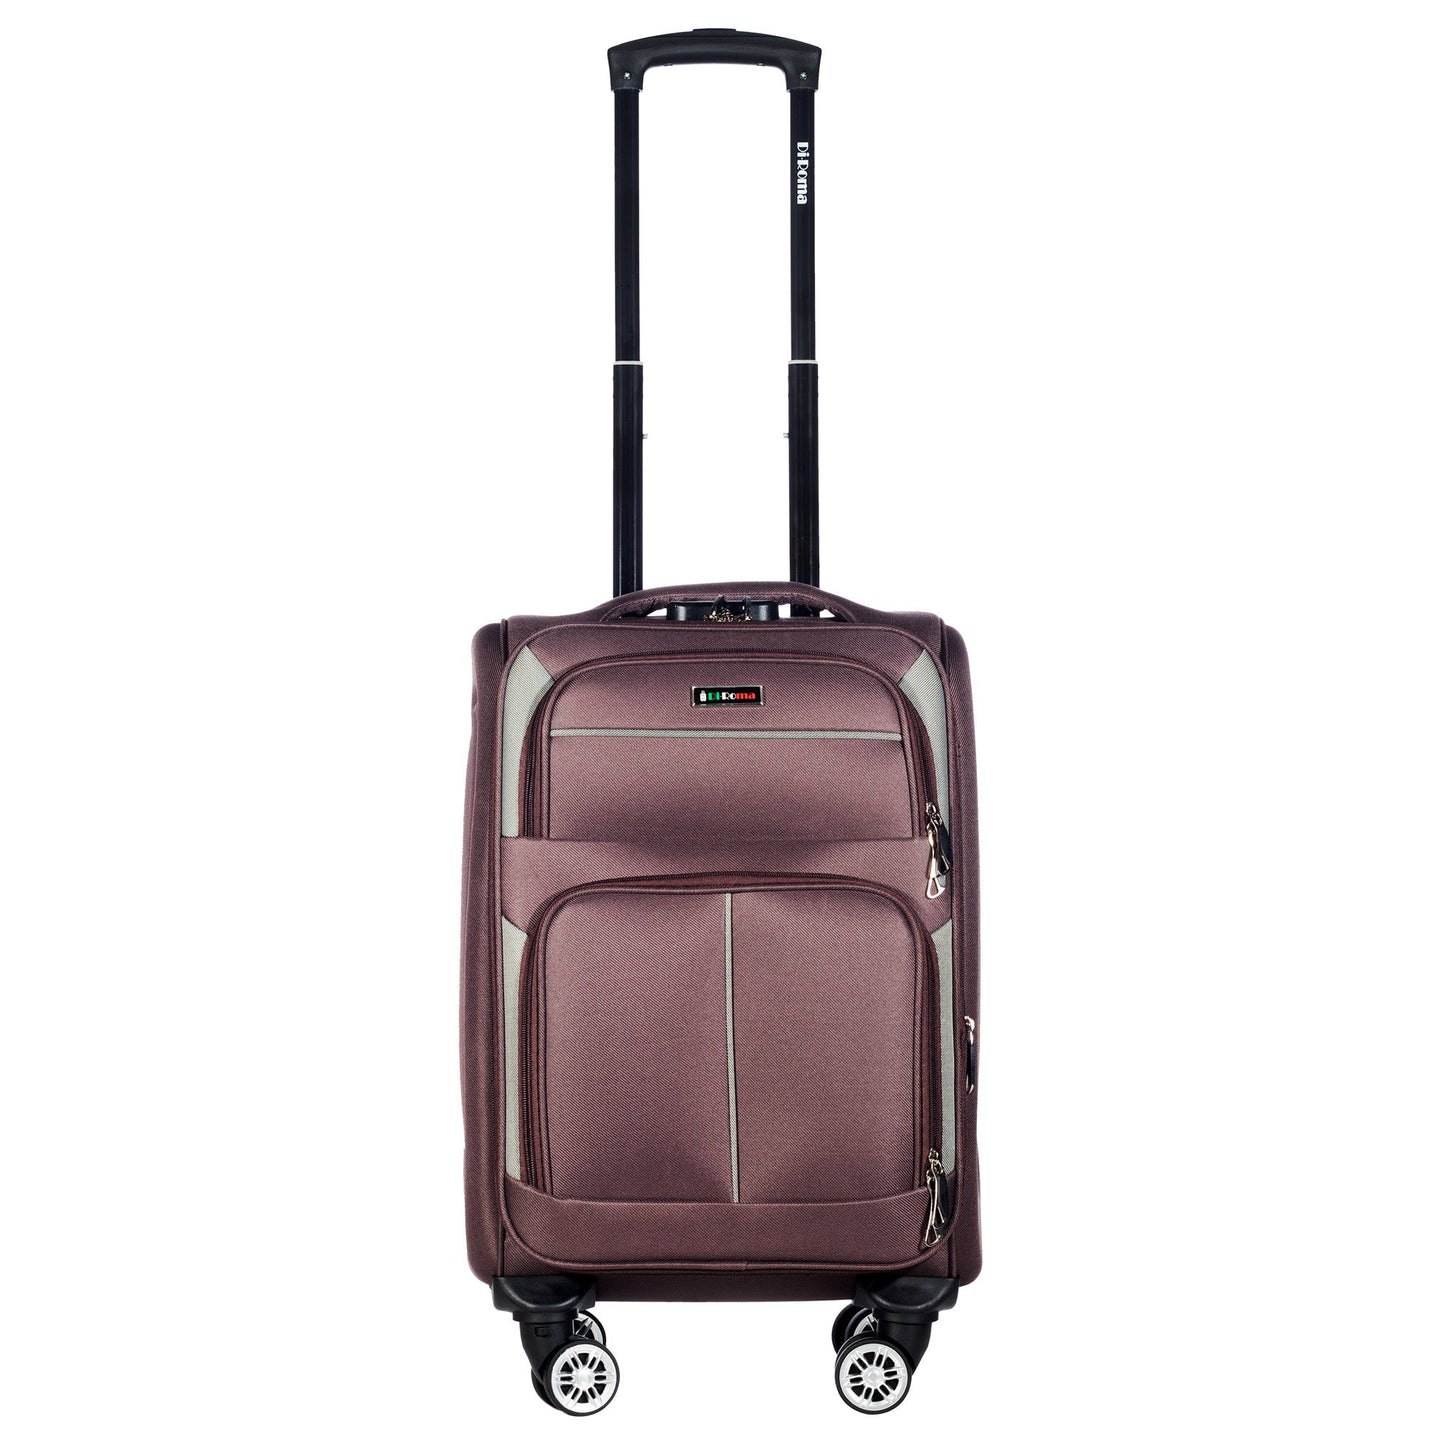 Star collection luggage brown (20/26/28/30") Suitcase